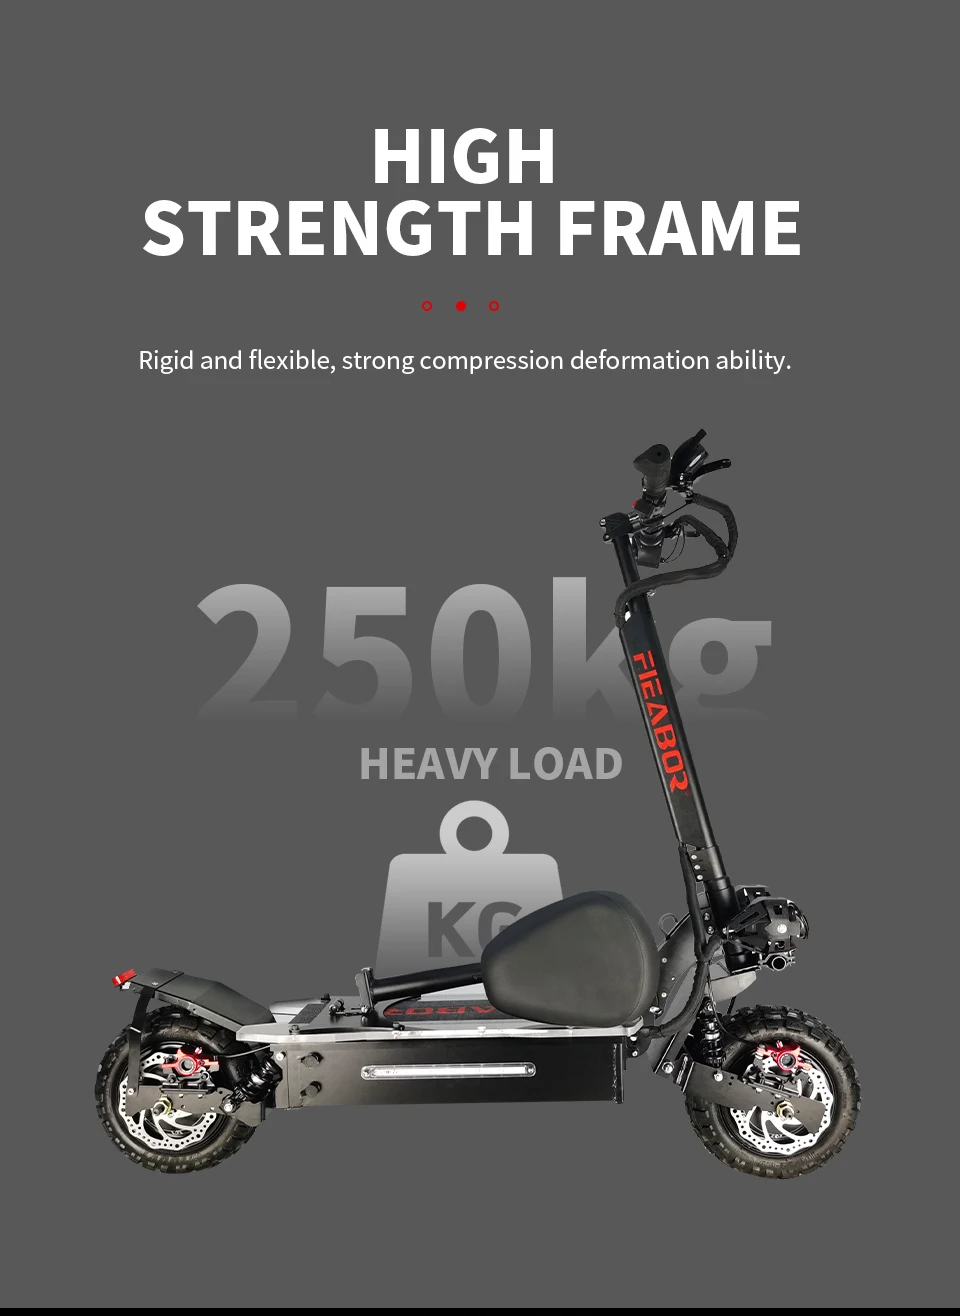 A portable electric scooter that supports 250 kg or 551 lbs.